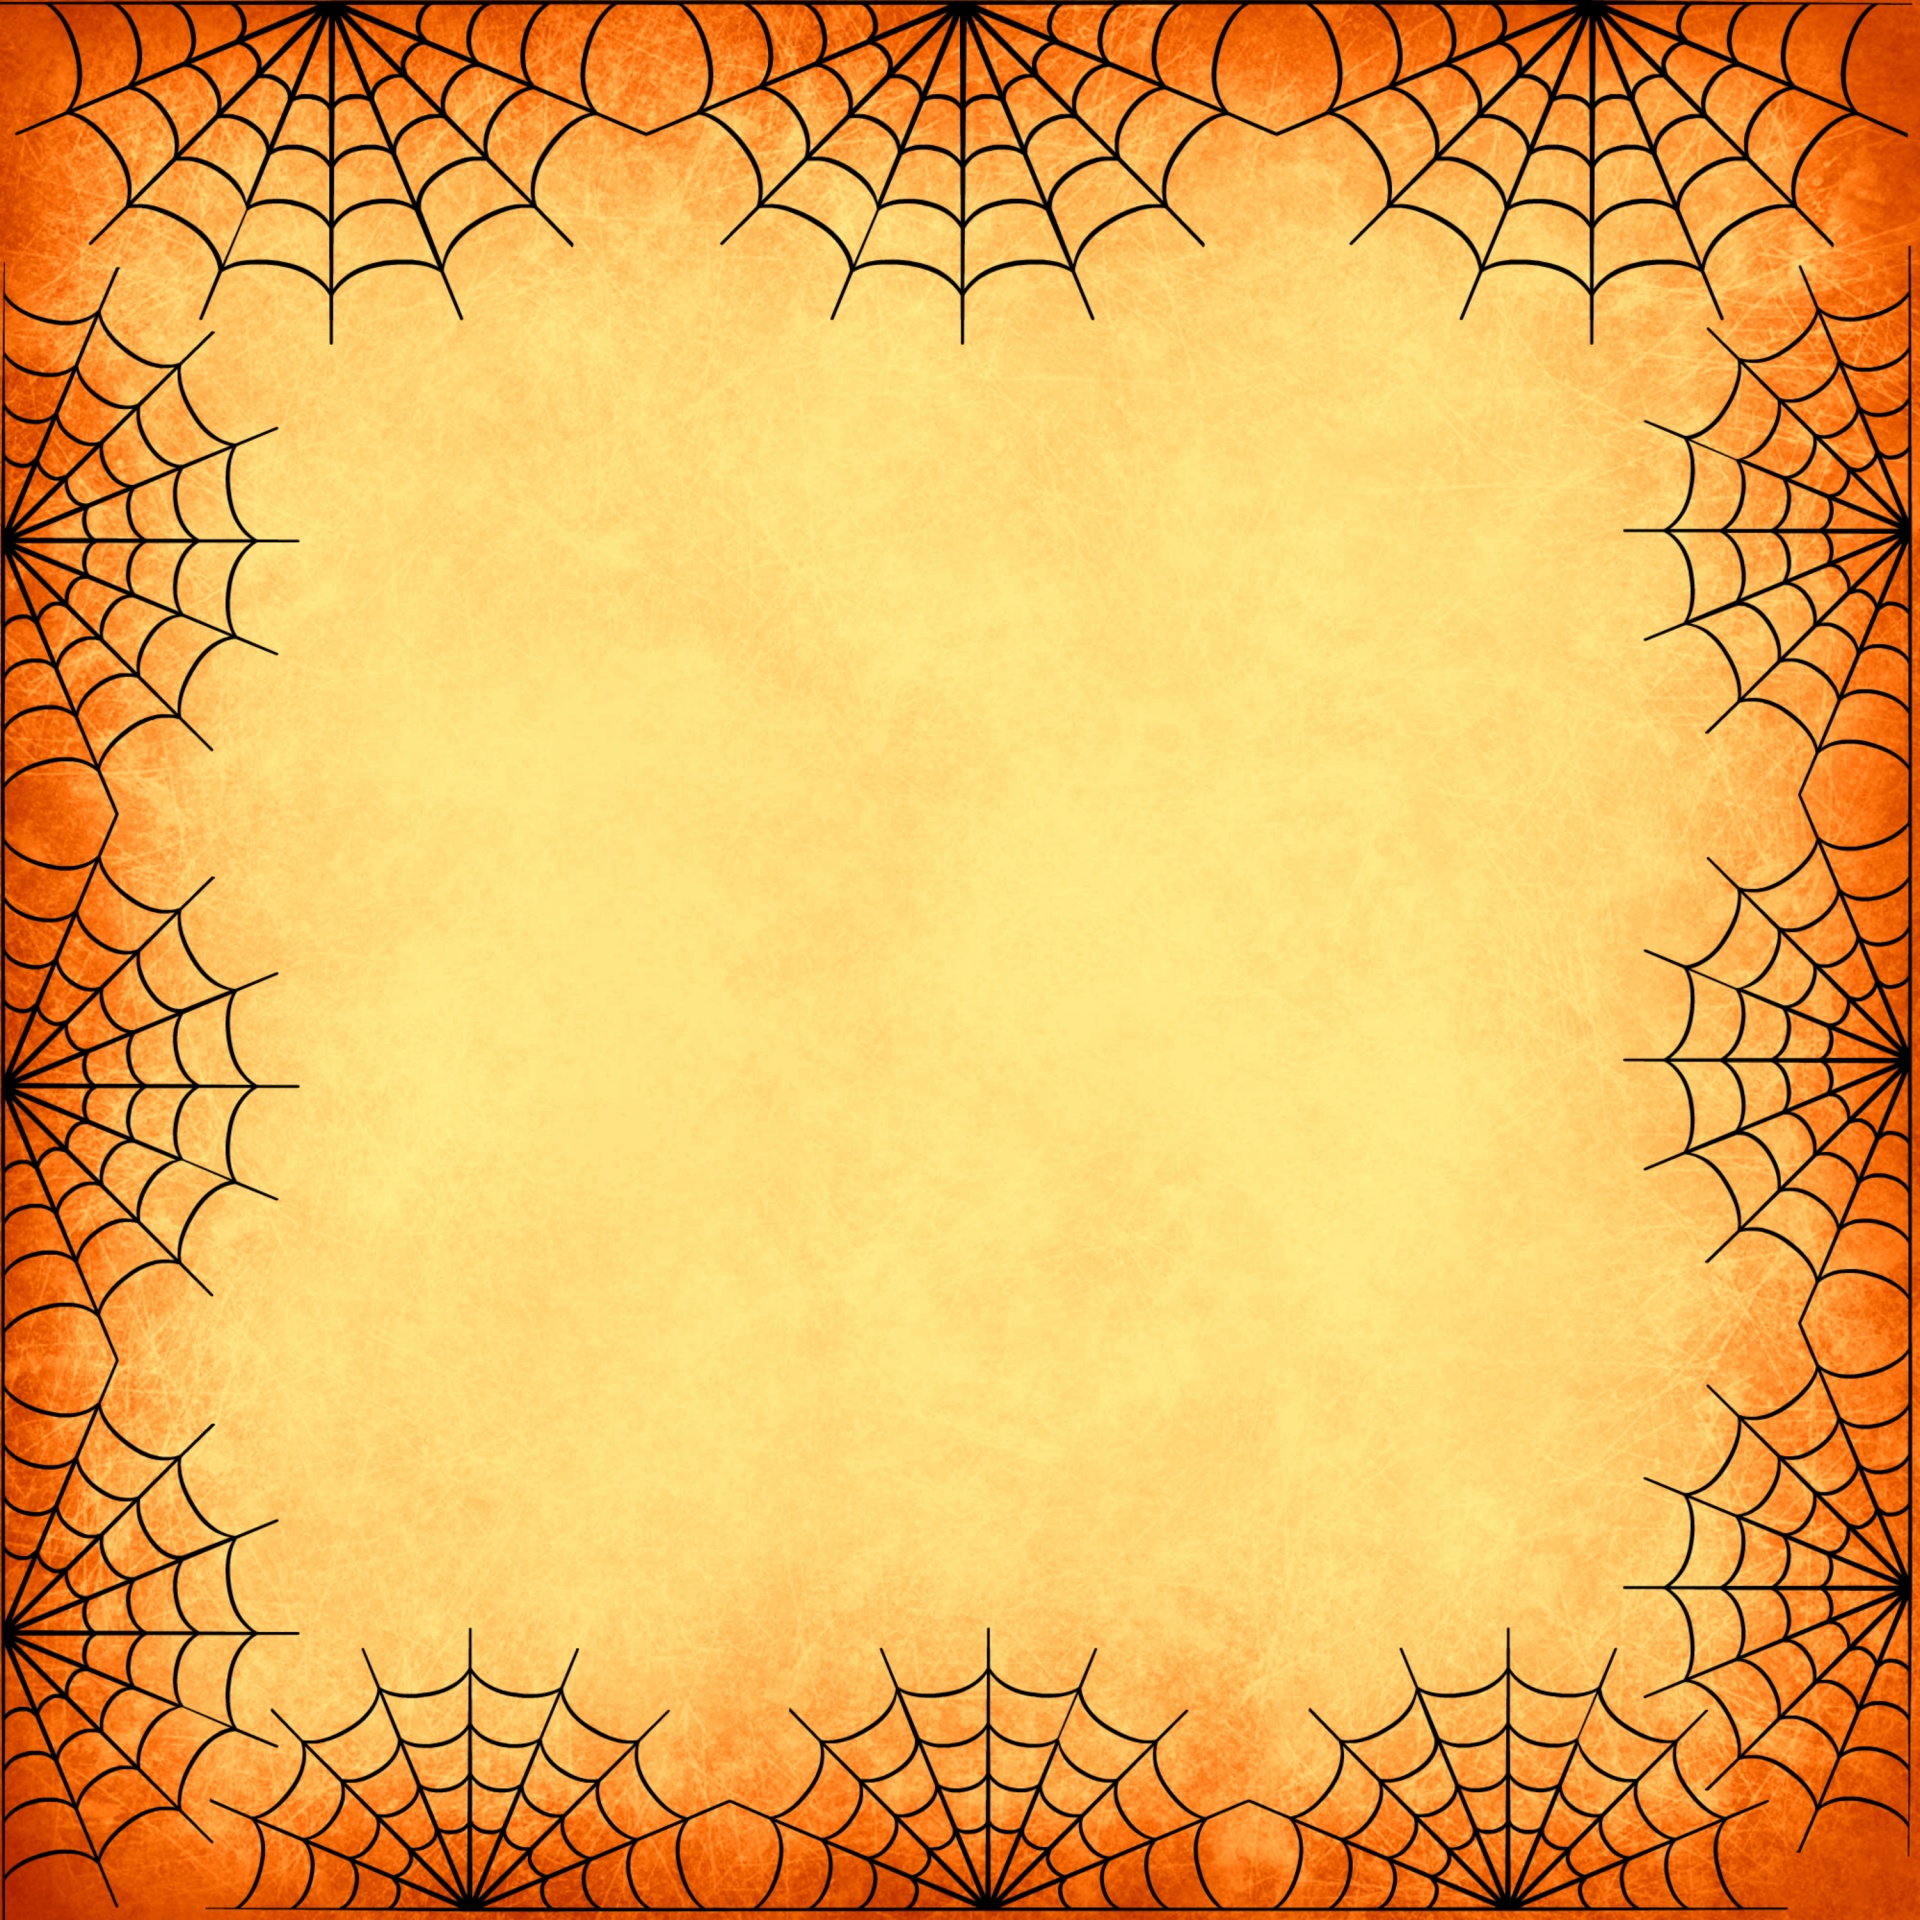 background wallpaper of parchment grunge paper with spider web border